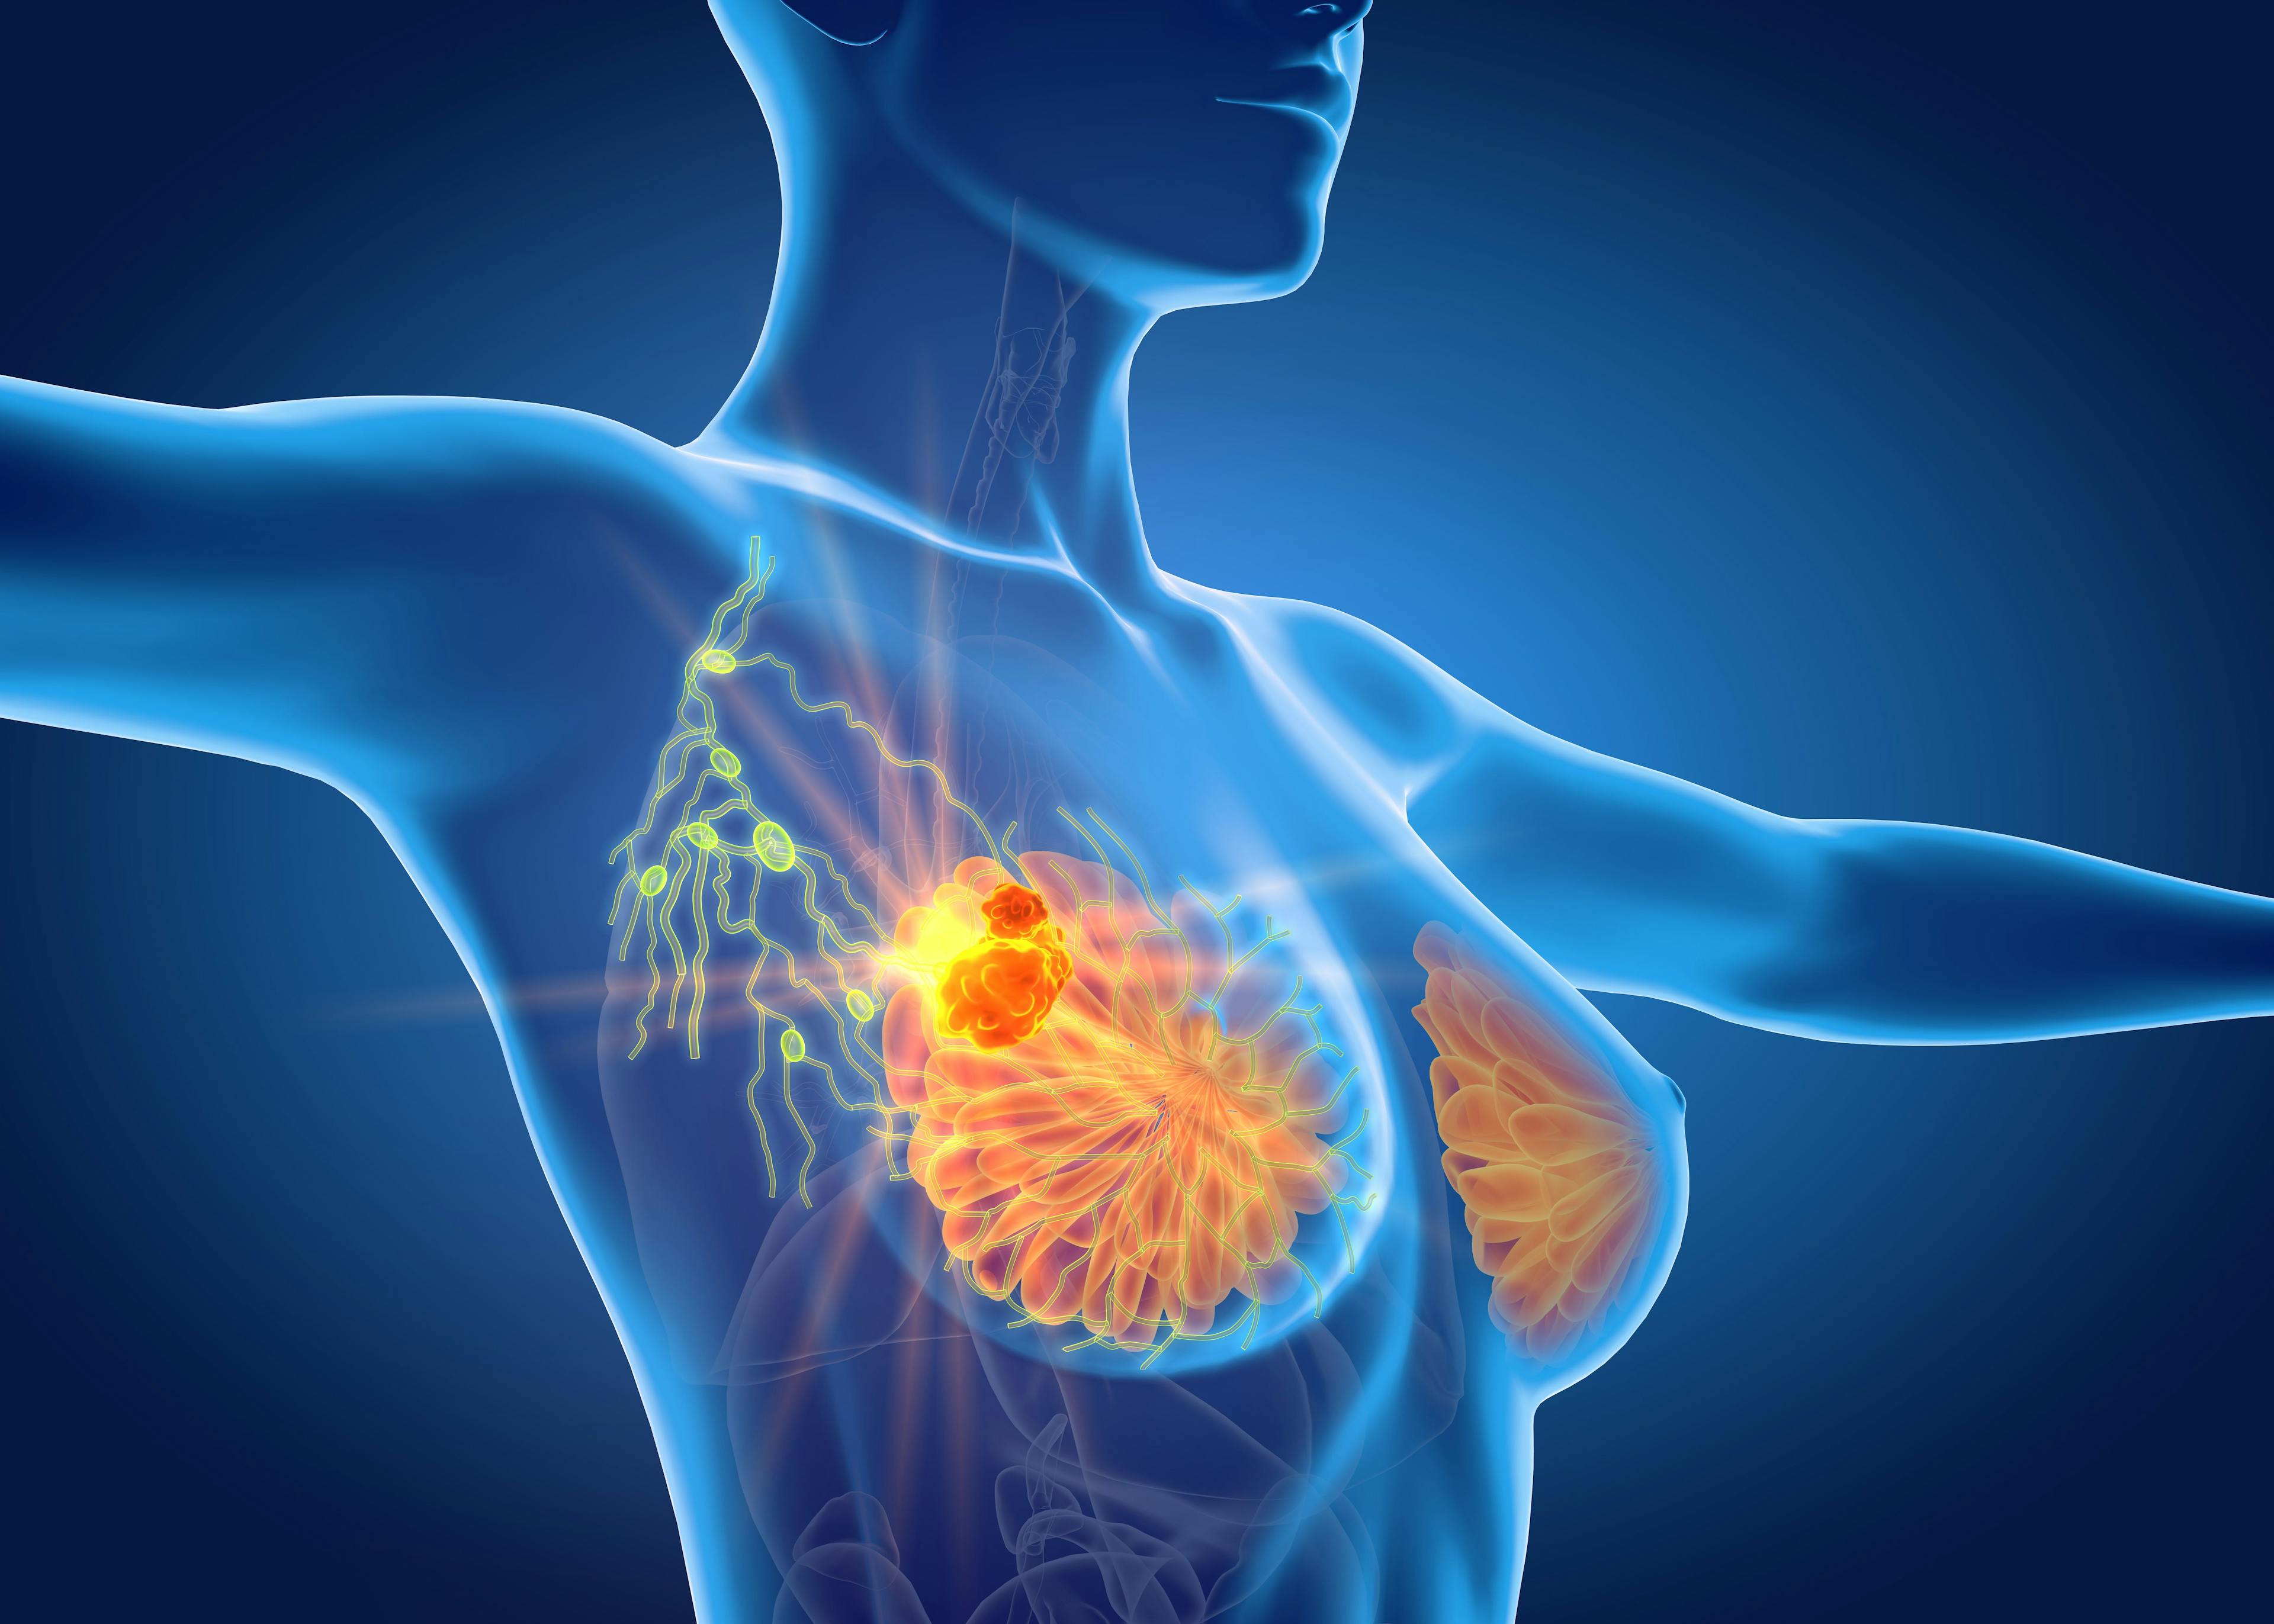 Breast cancer with lymphatics, medically 3D illustration | Image credit: Axel Kock - stock.adobe.com